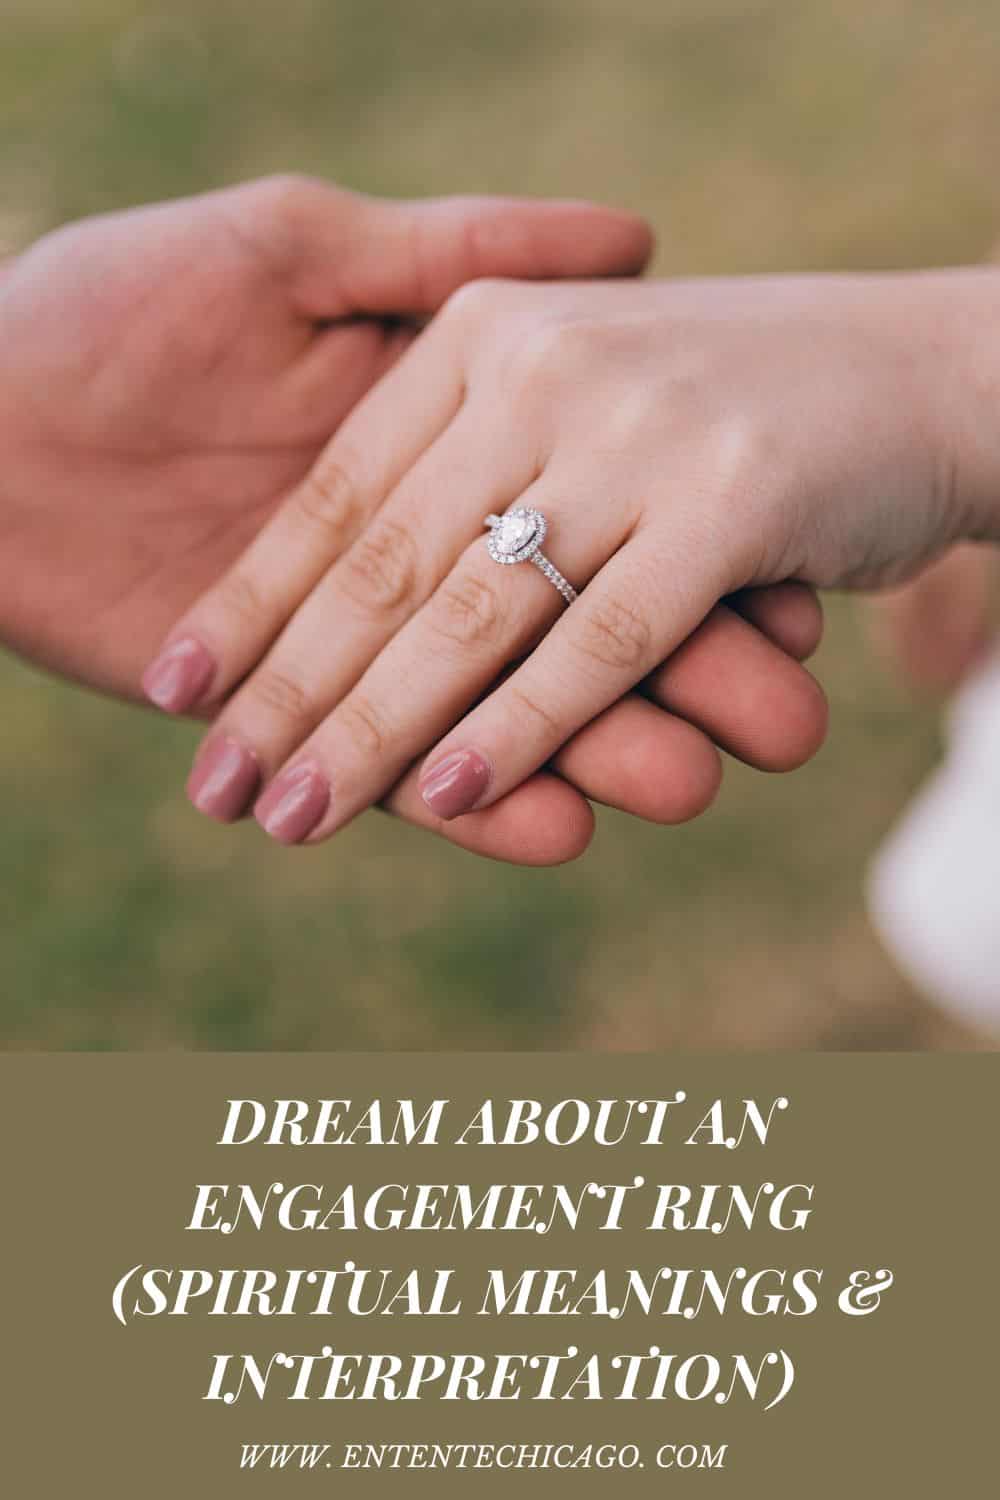 What Does It Mean When You Dream About An Engagement Ring